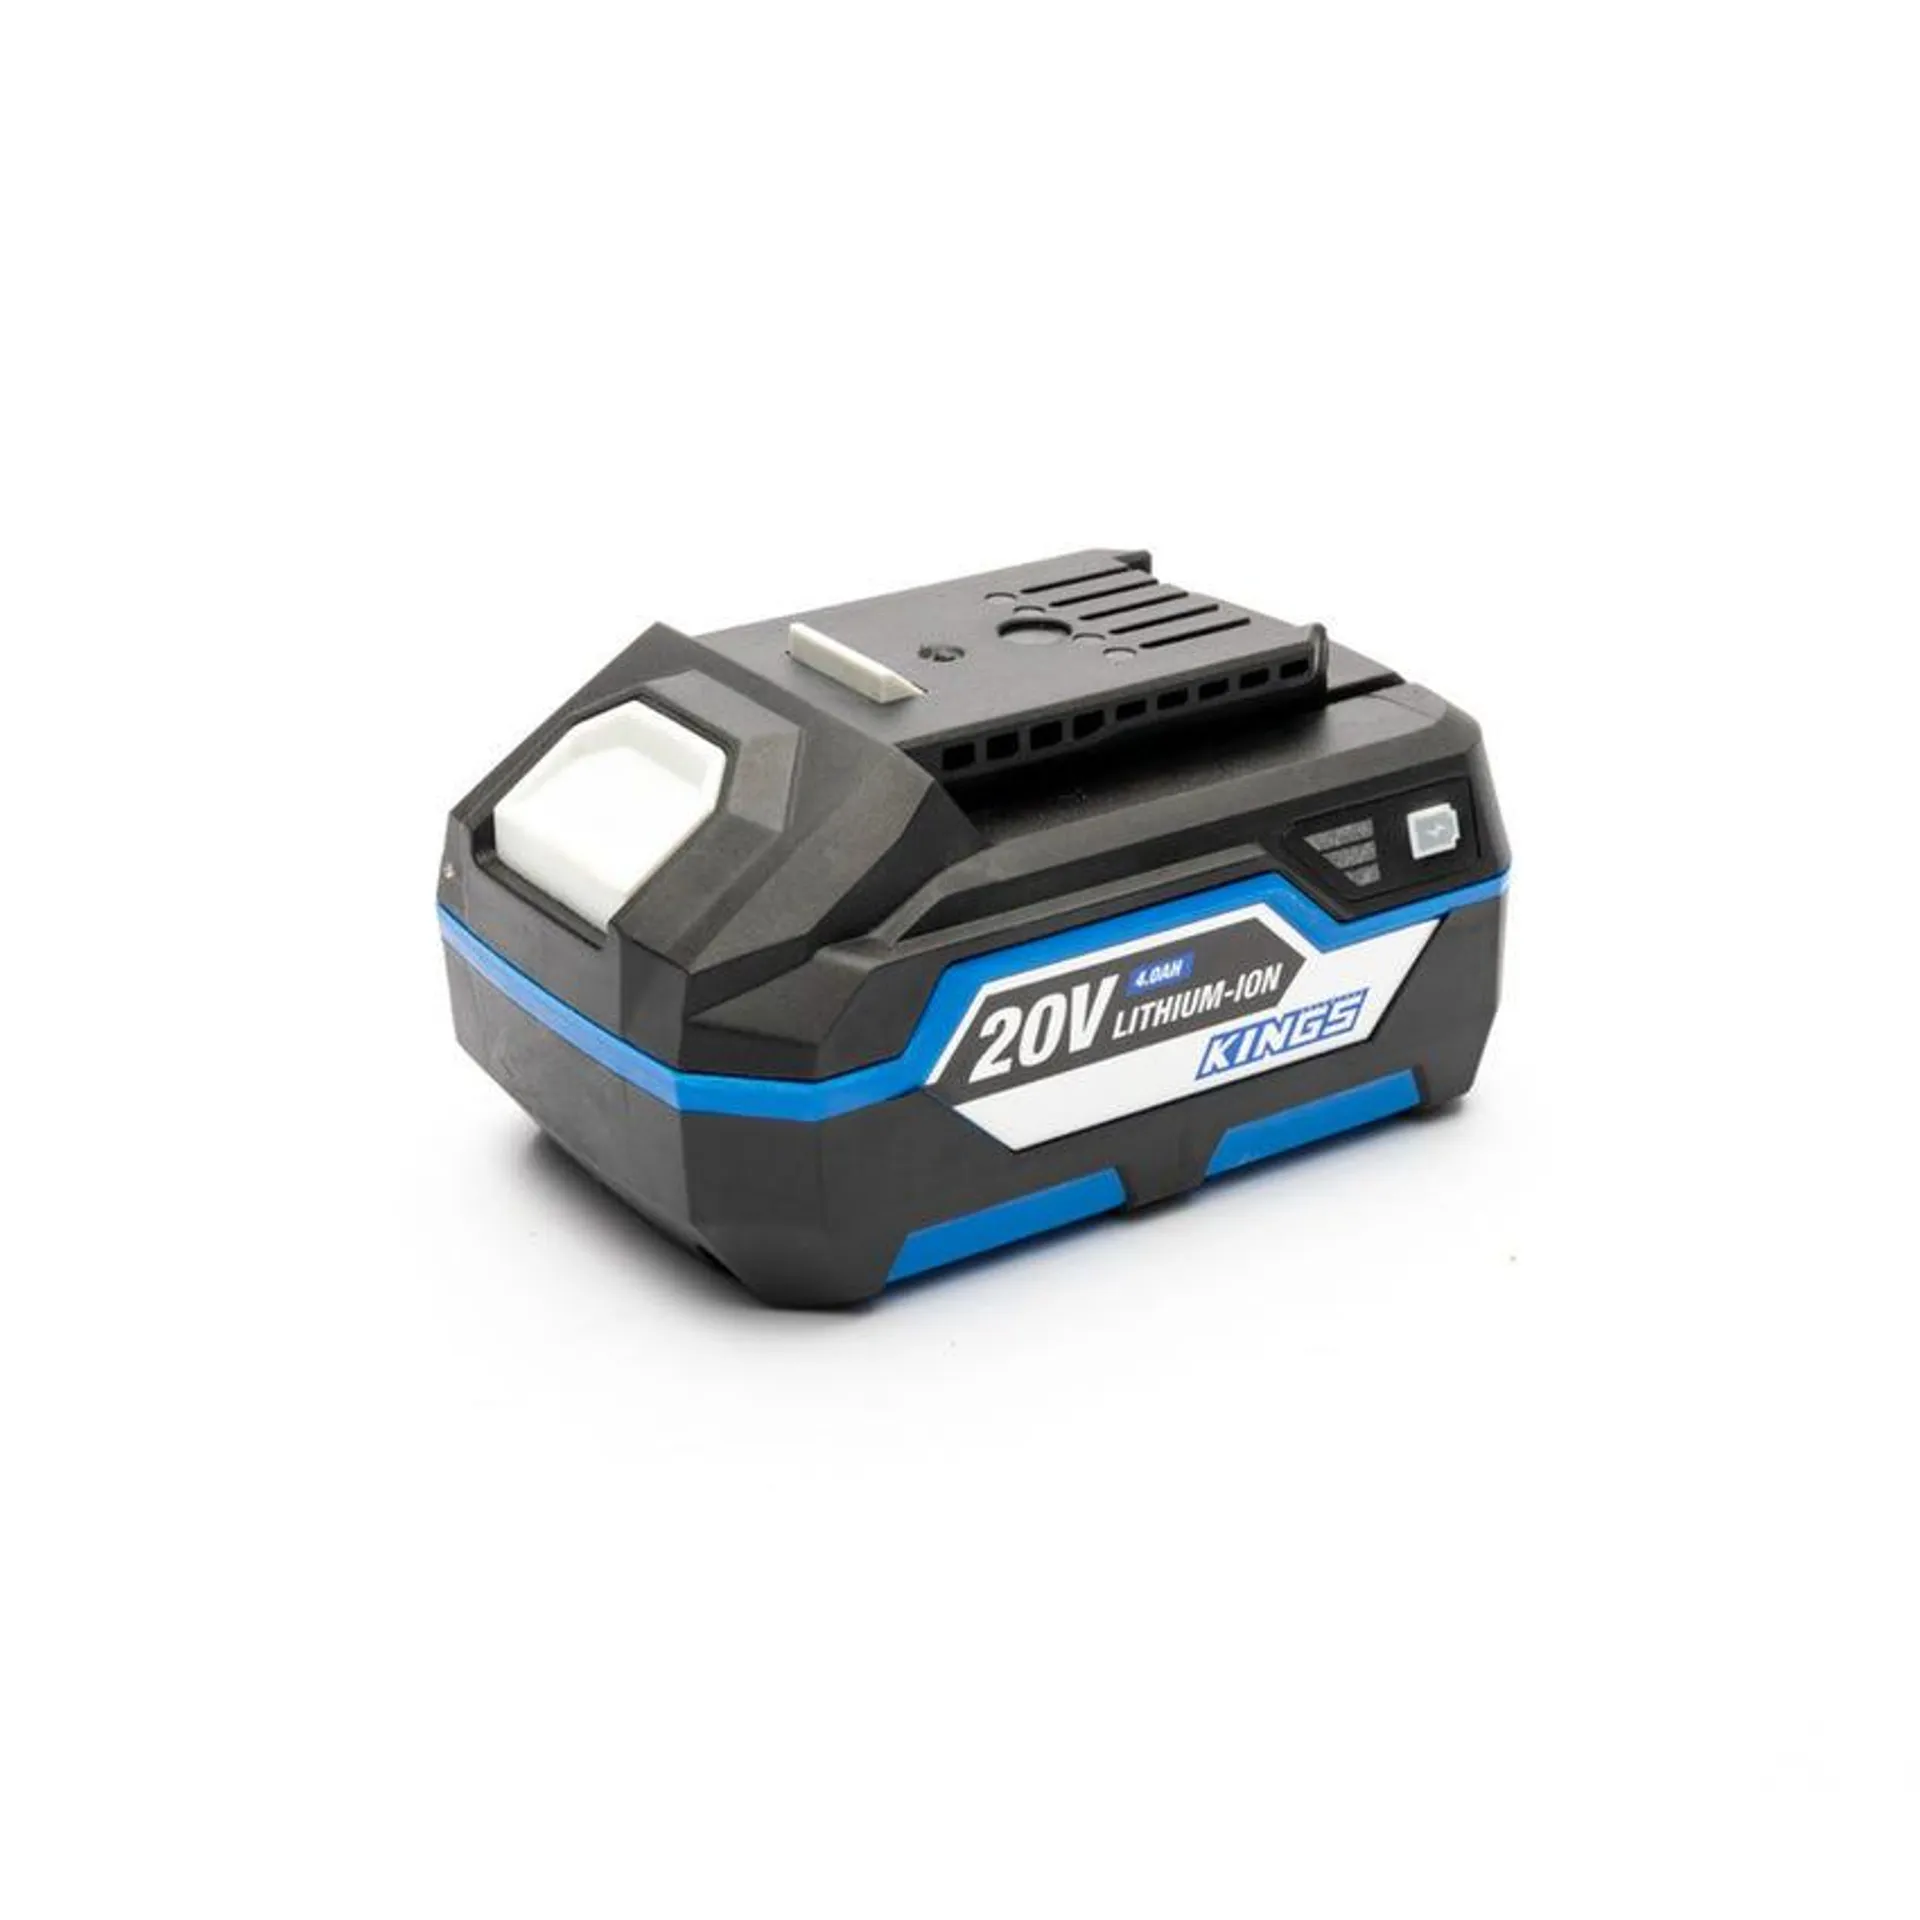 Kings 20V 4Ah Lithium Ion Battery | LED Charge Indicator | Suitable for Adventure Kings Power Tools